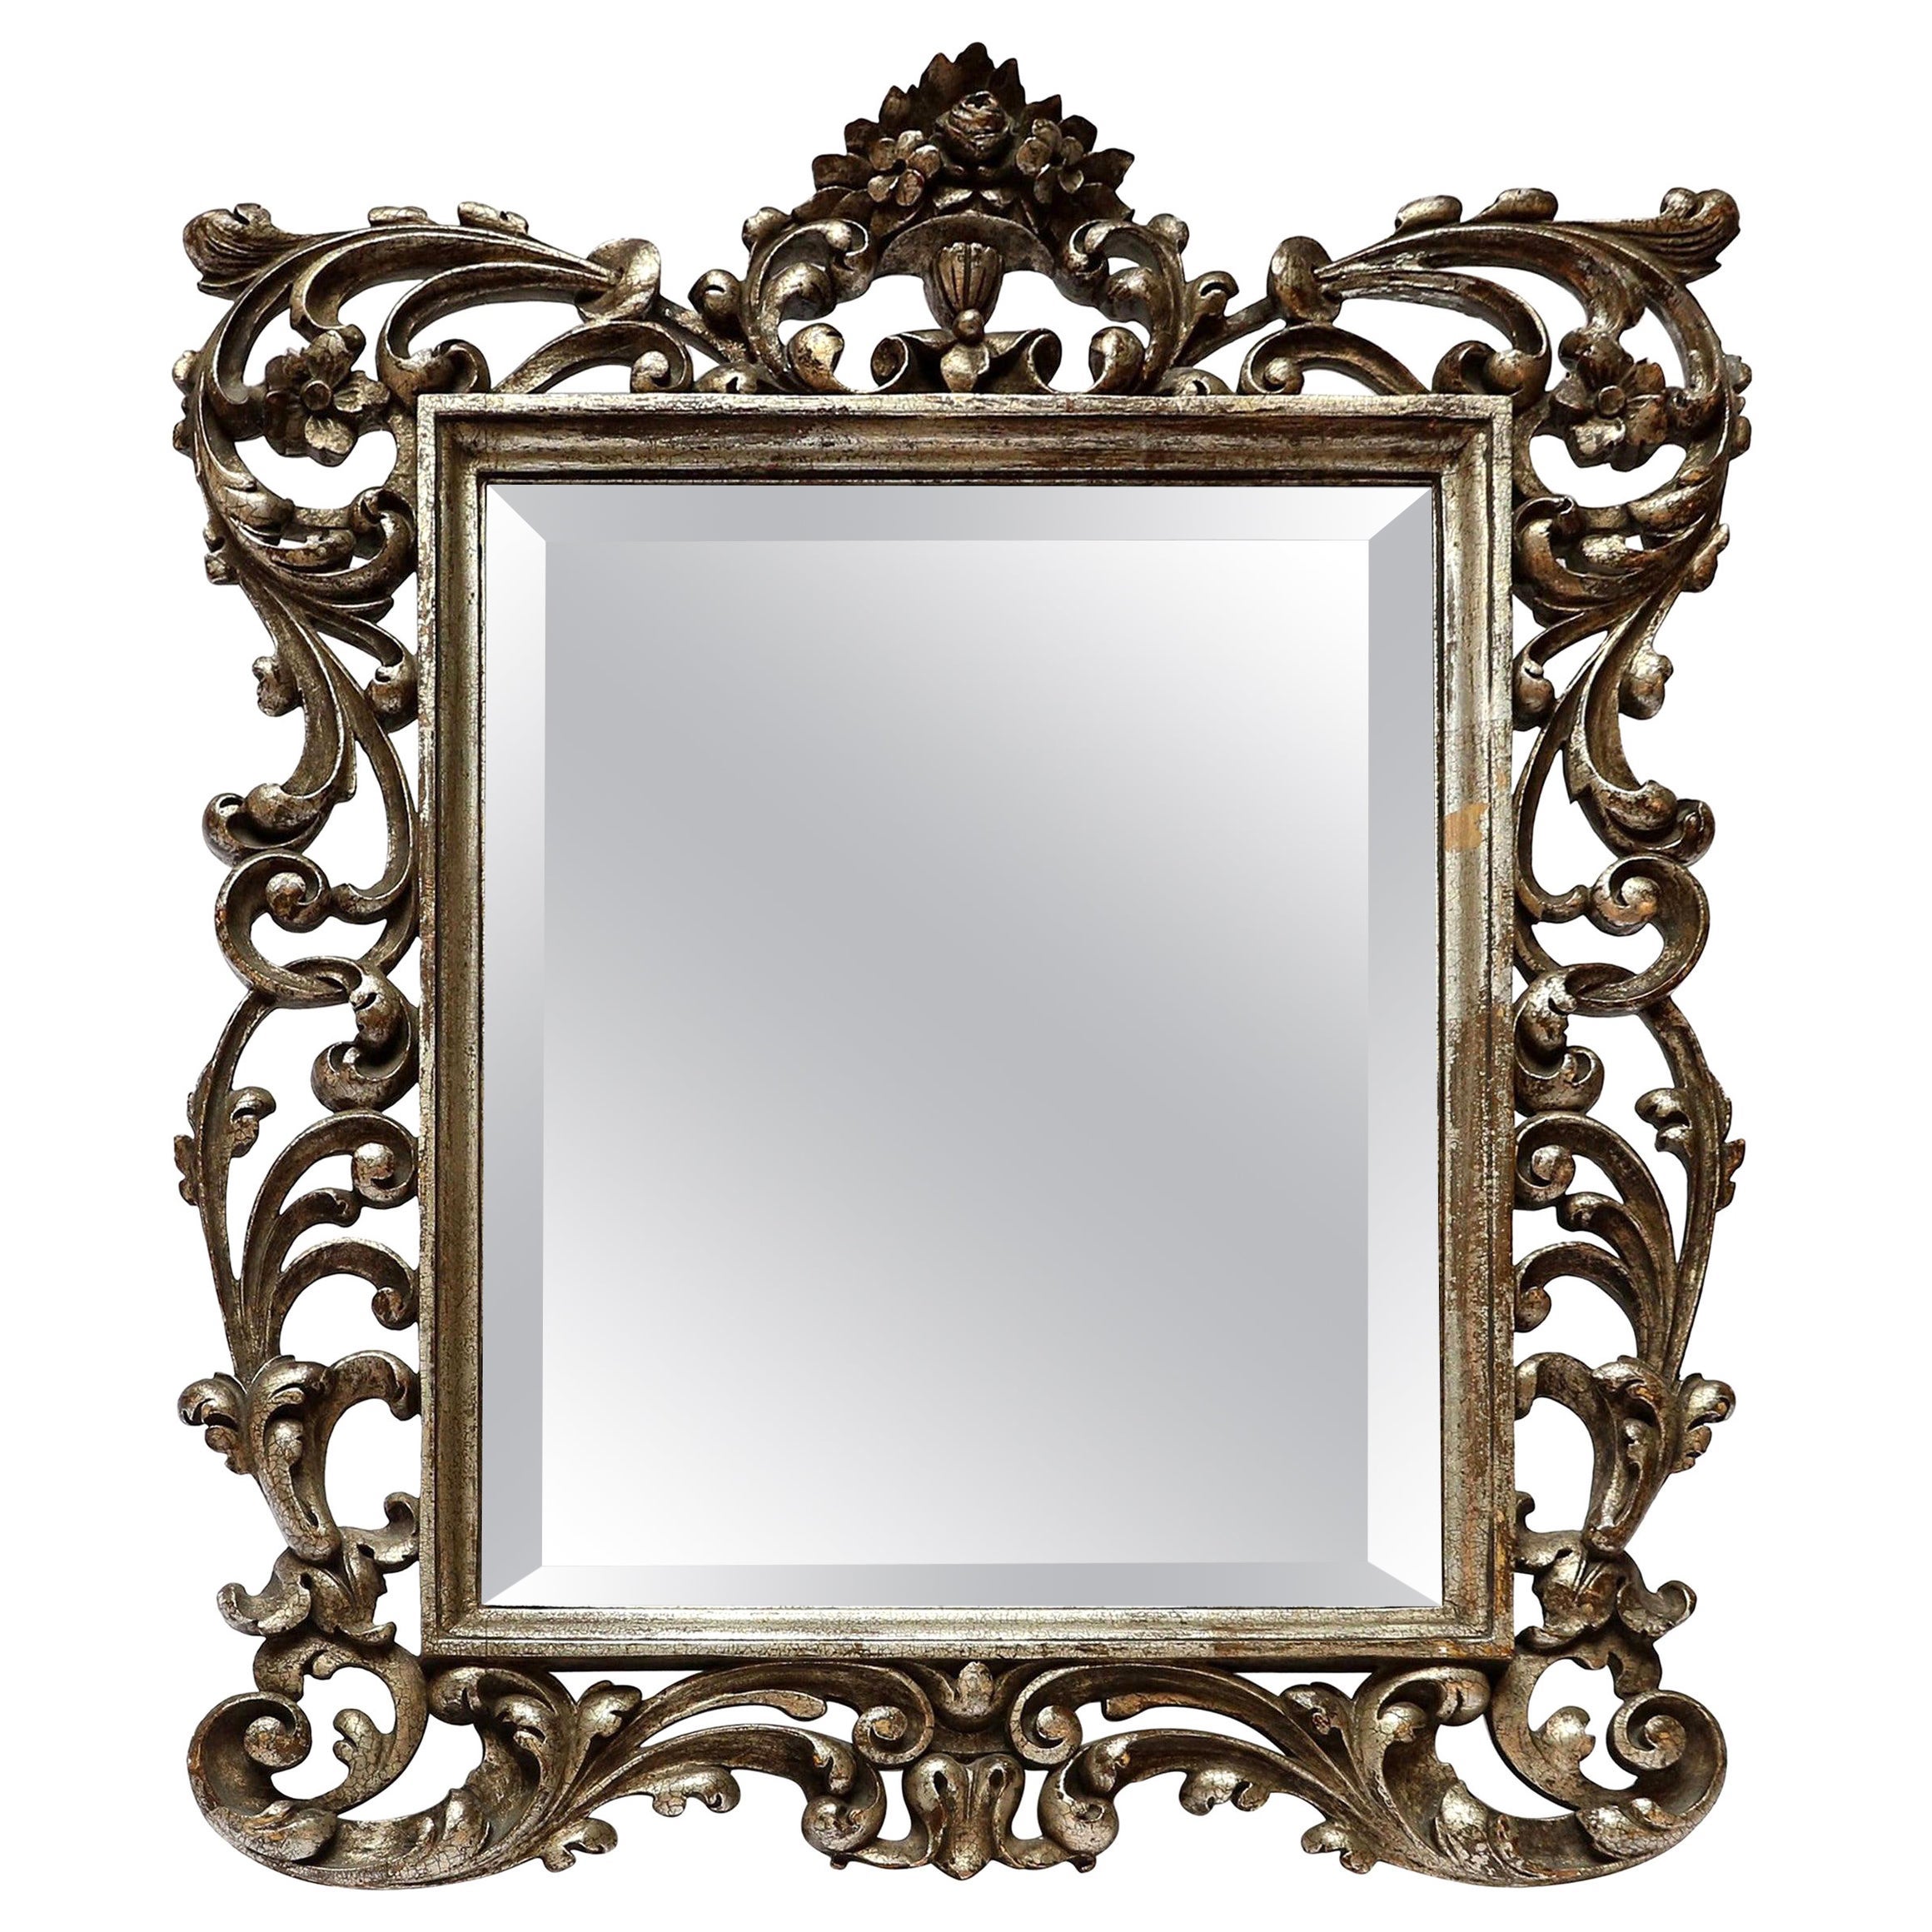 19th Century French Baroque Giltwood Vanity or Wall Mirror